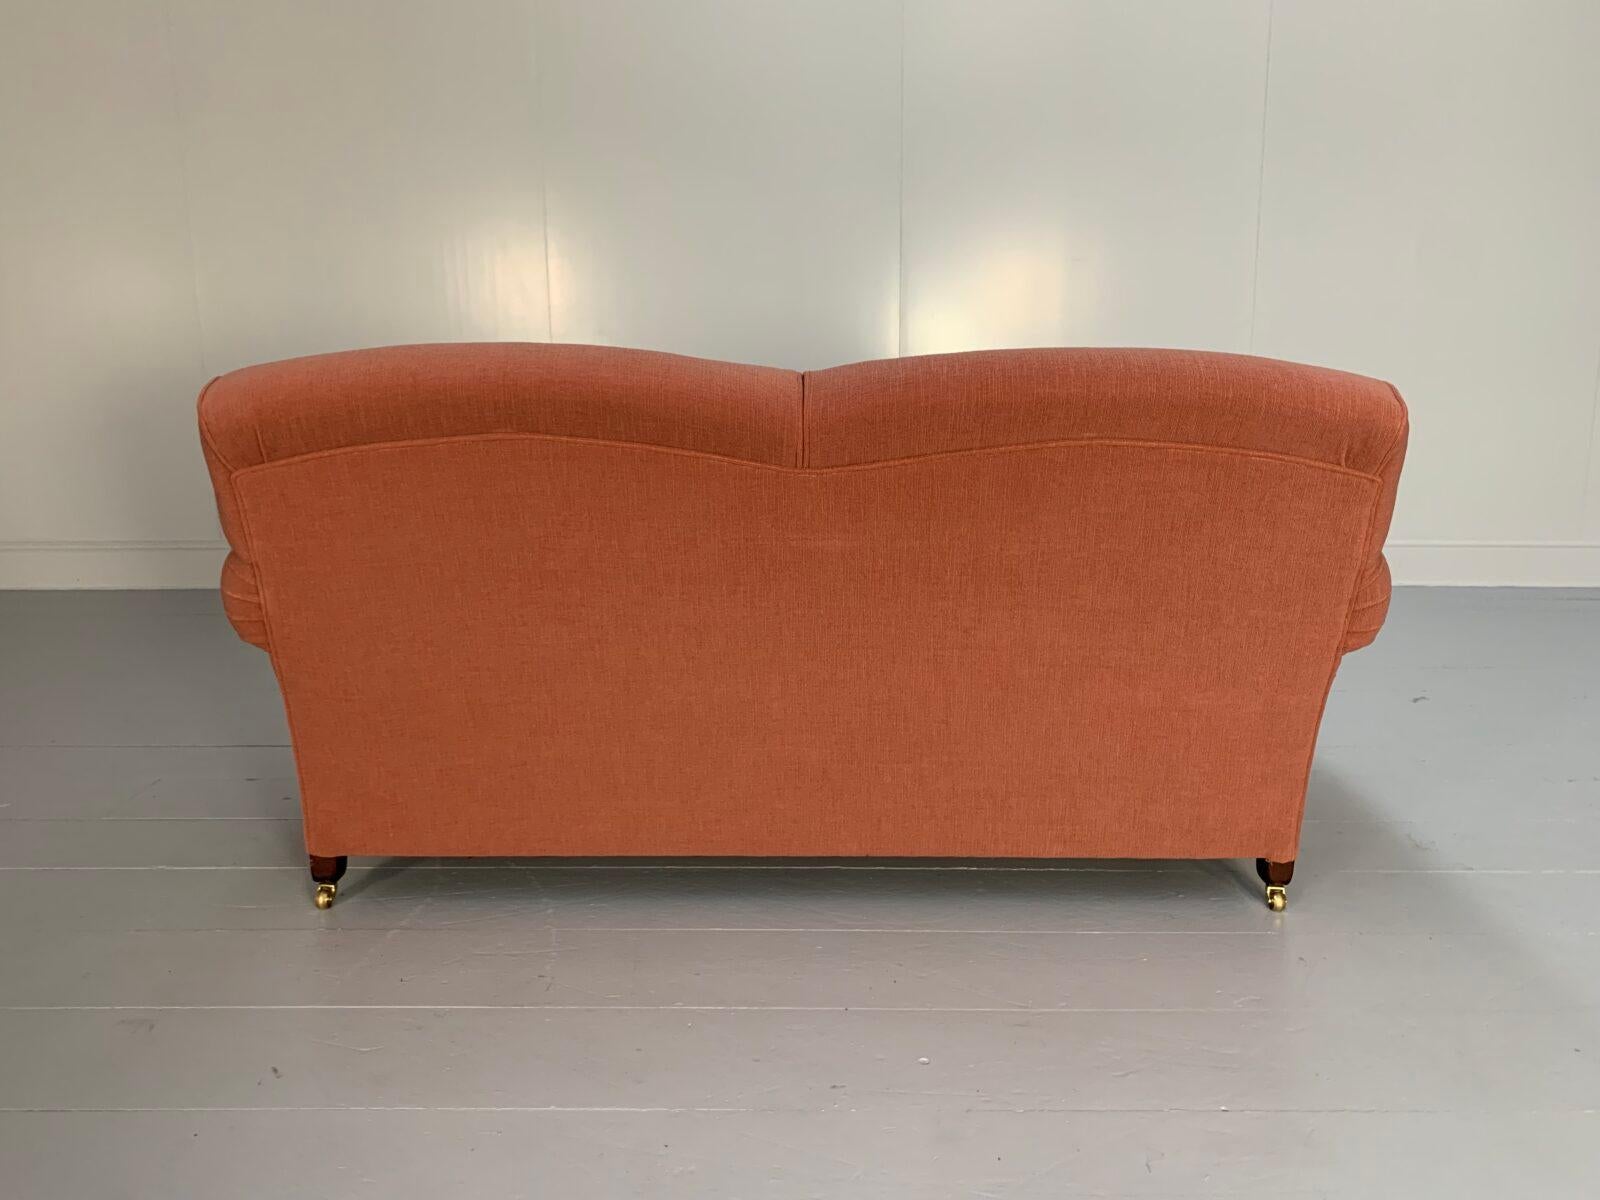 George Smith “Elverdon-Arm” 2.5-Seat Sofa – In Woven Fabric In Good Condition For Sale In Barrowford, GB